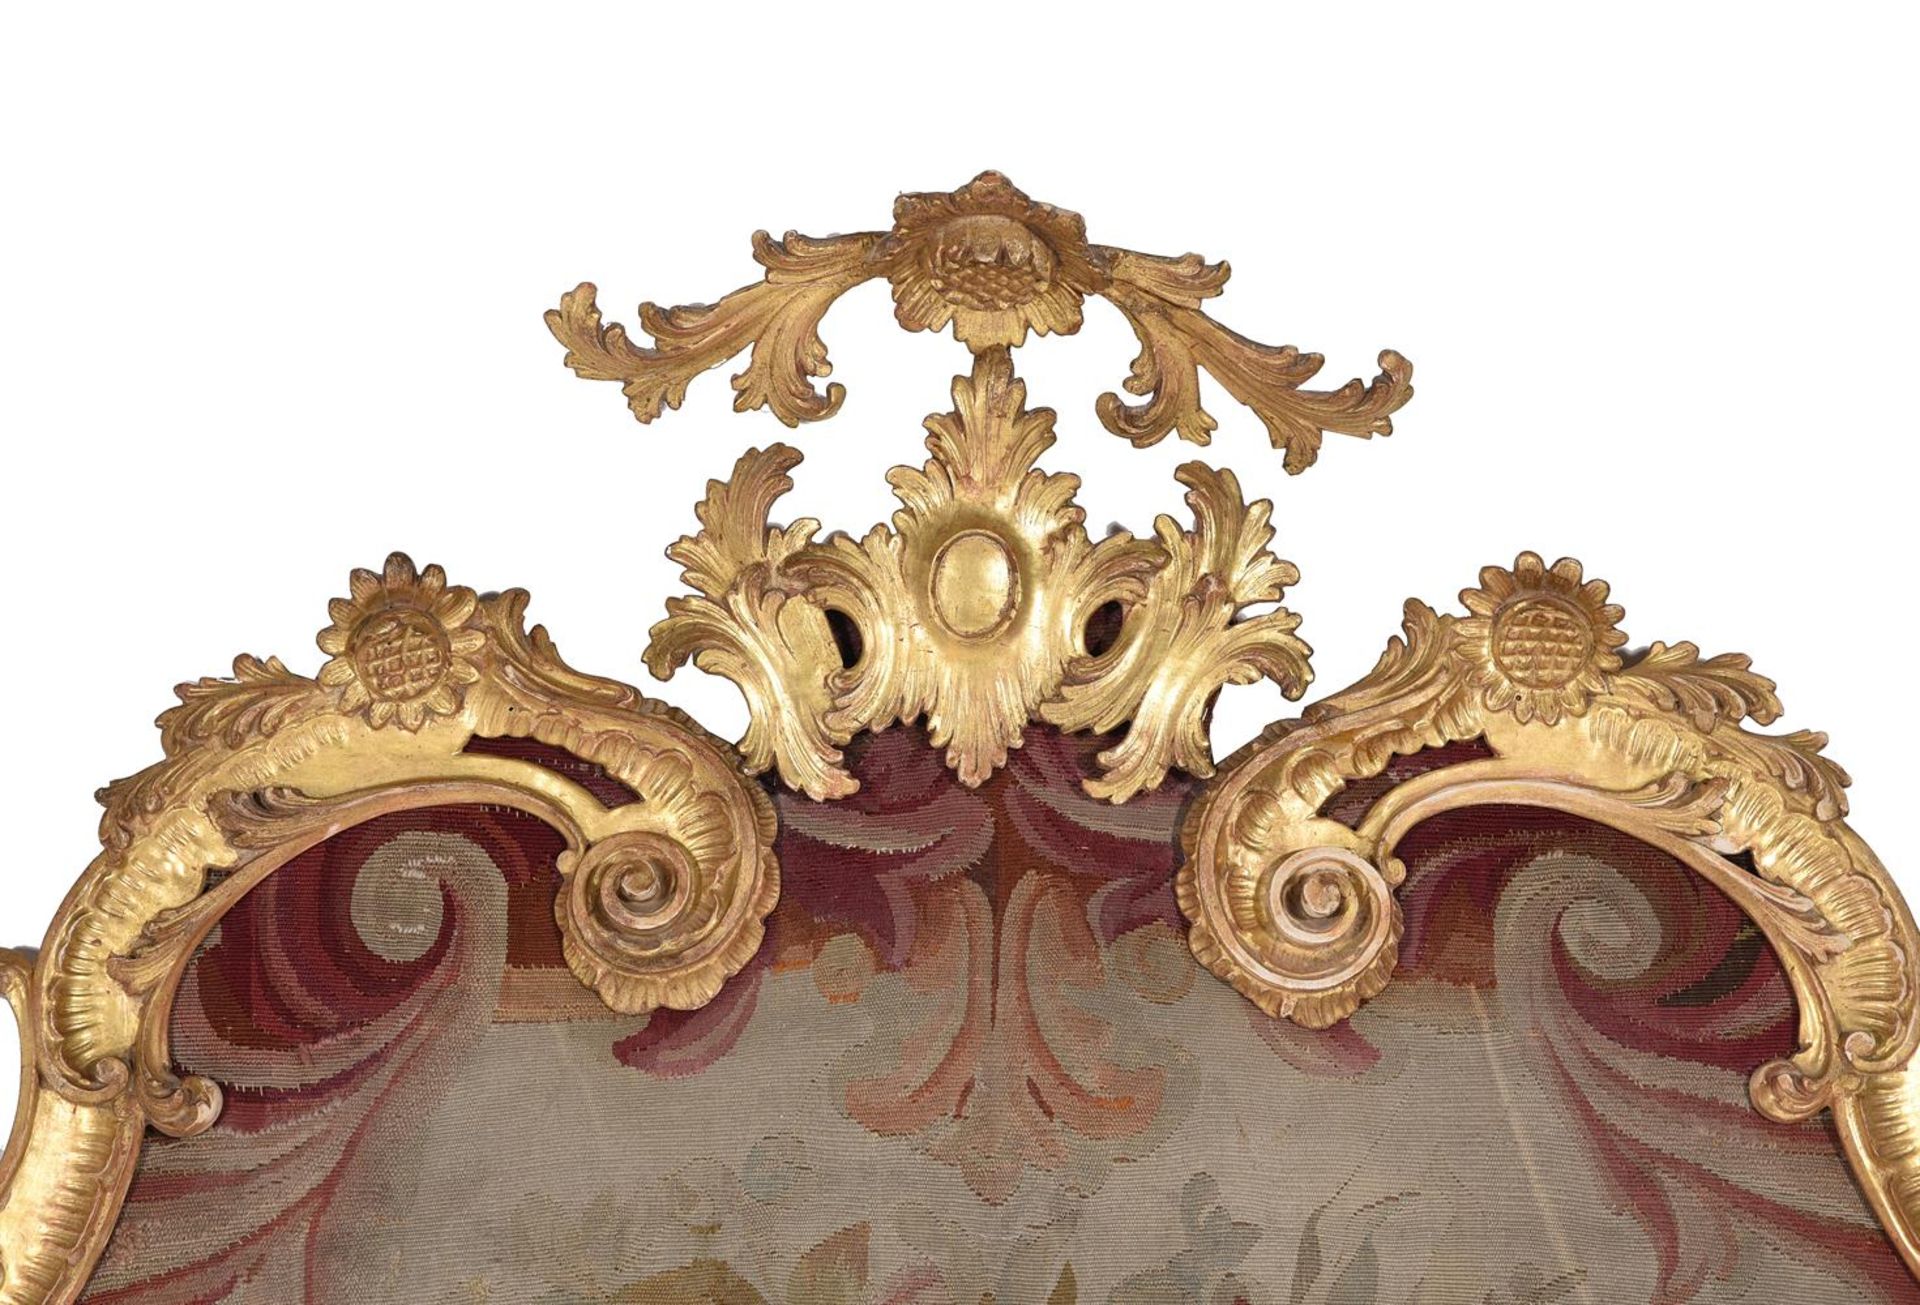 A CONTINENTAL CARVED GILTWOOD AND AUBUSSON NEEDLEWORK INSET BED HEAD, LATE 18TH/19TH CENTURY - Image 3 of 4